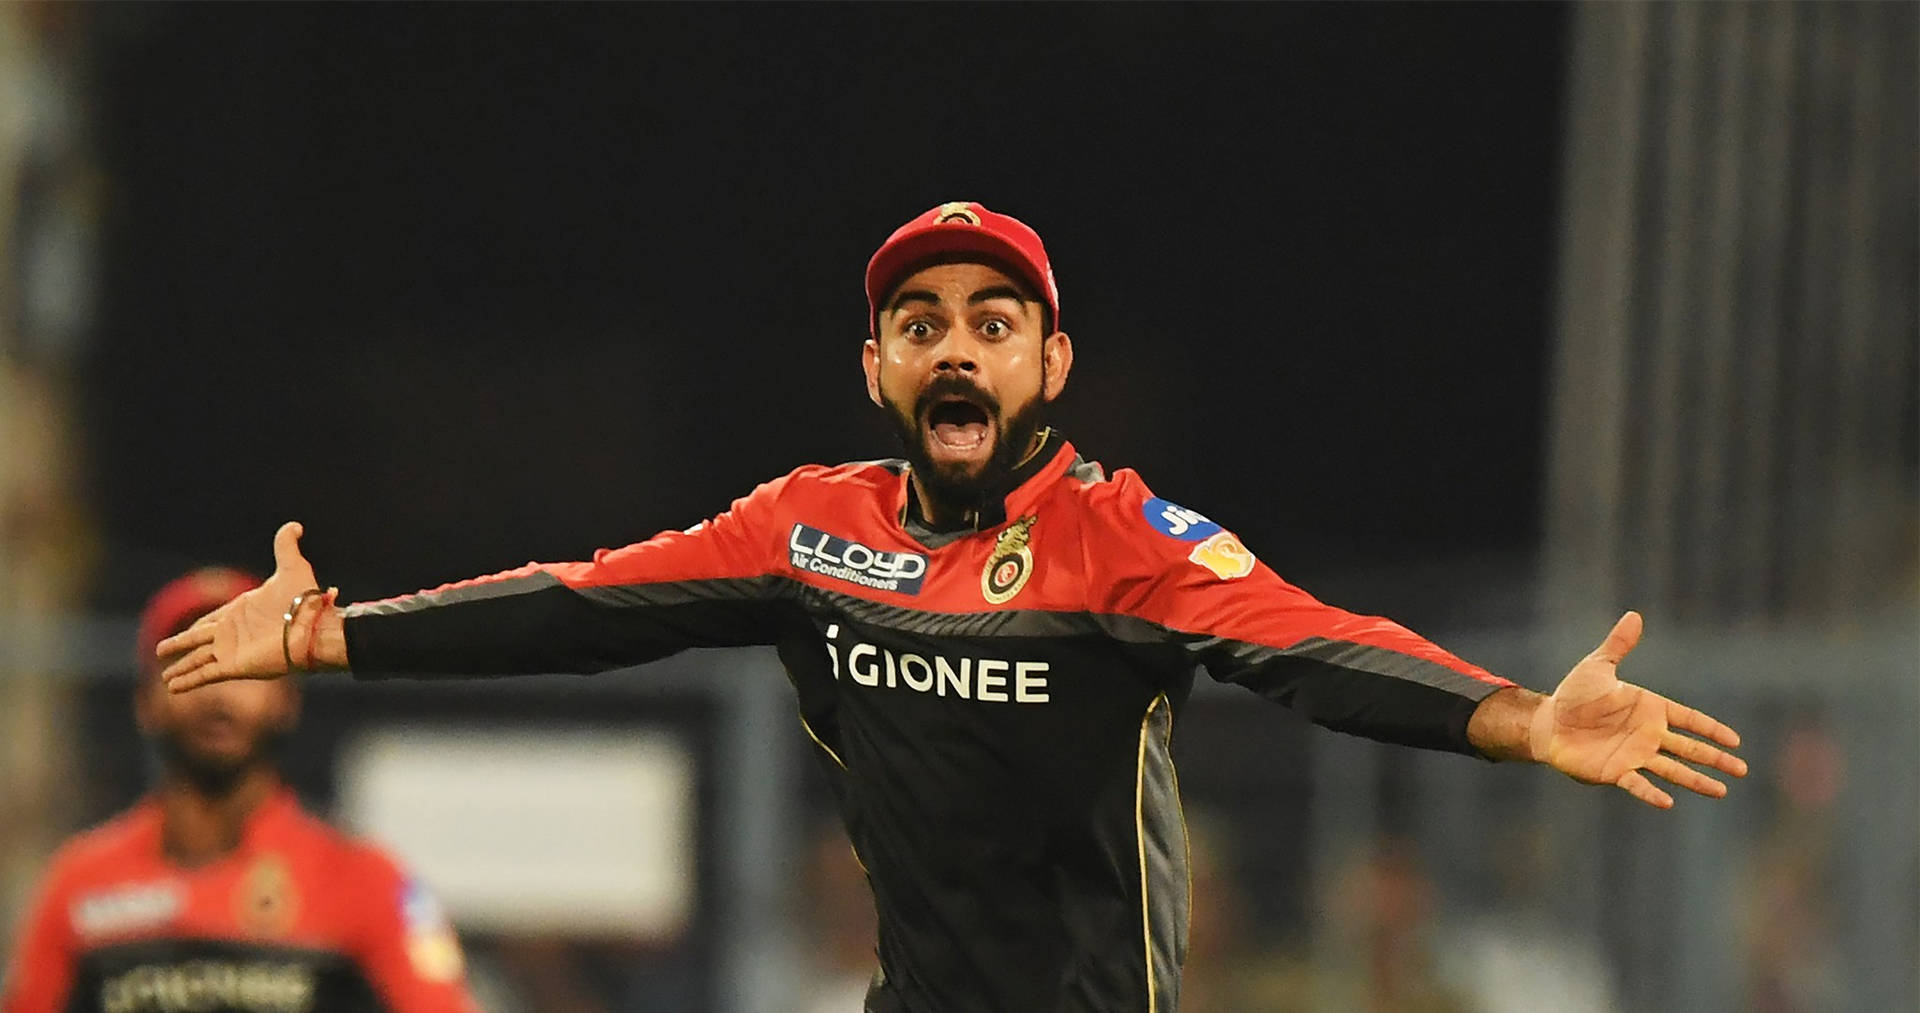 Rcb Team Kohli Arms Outstretched Background